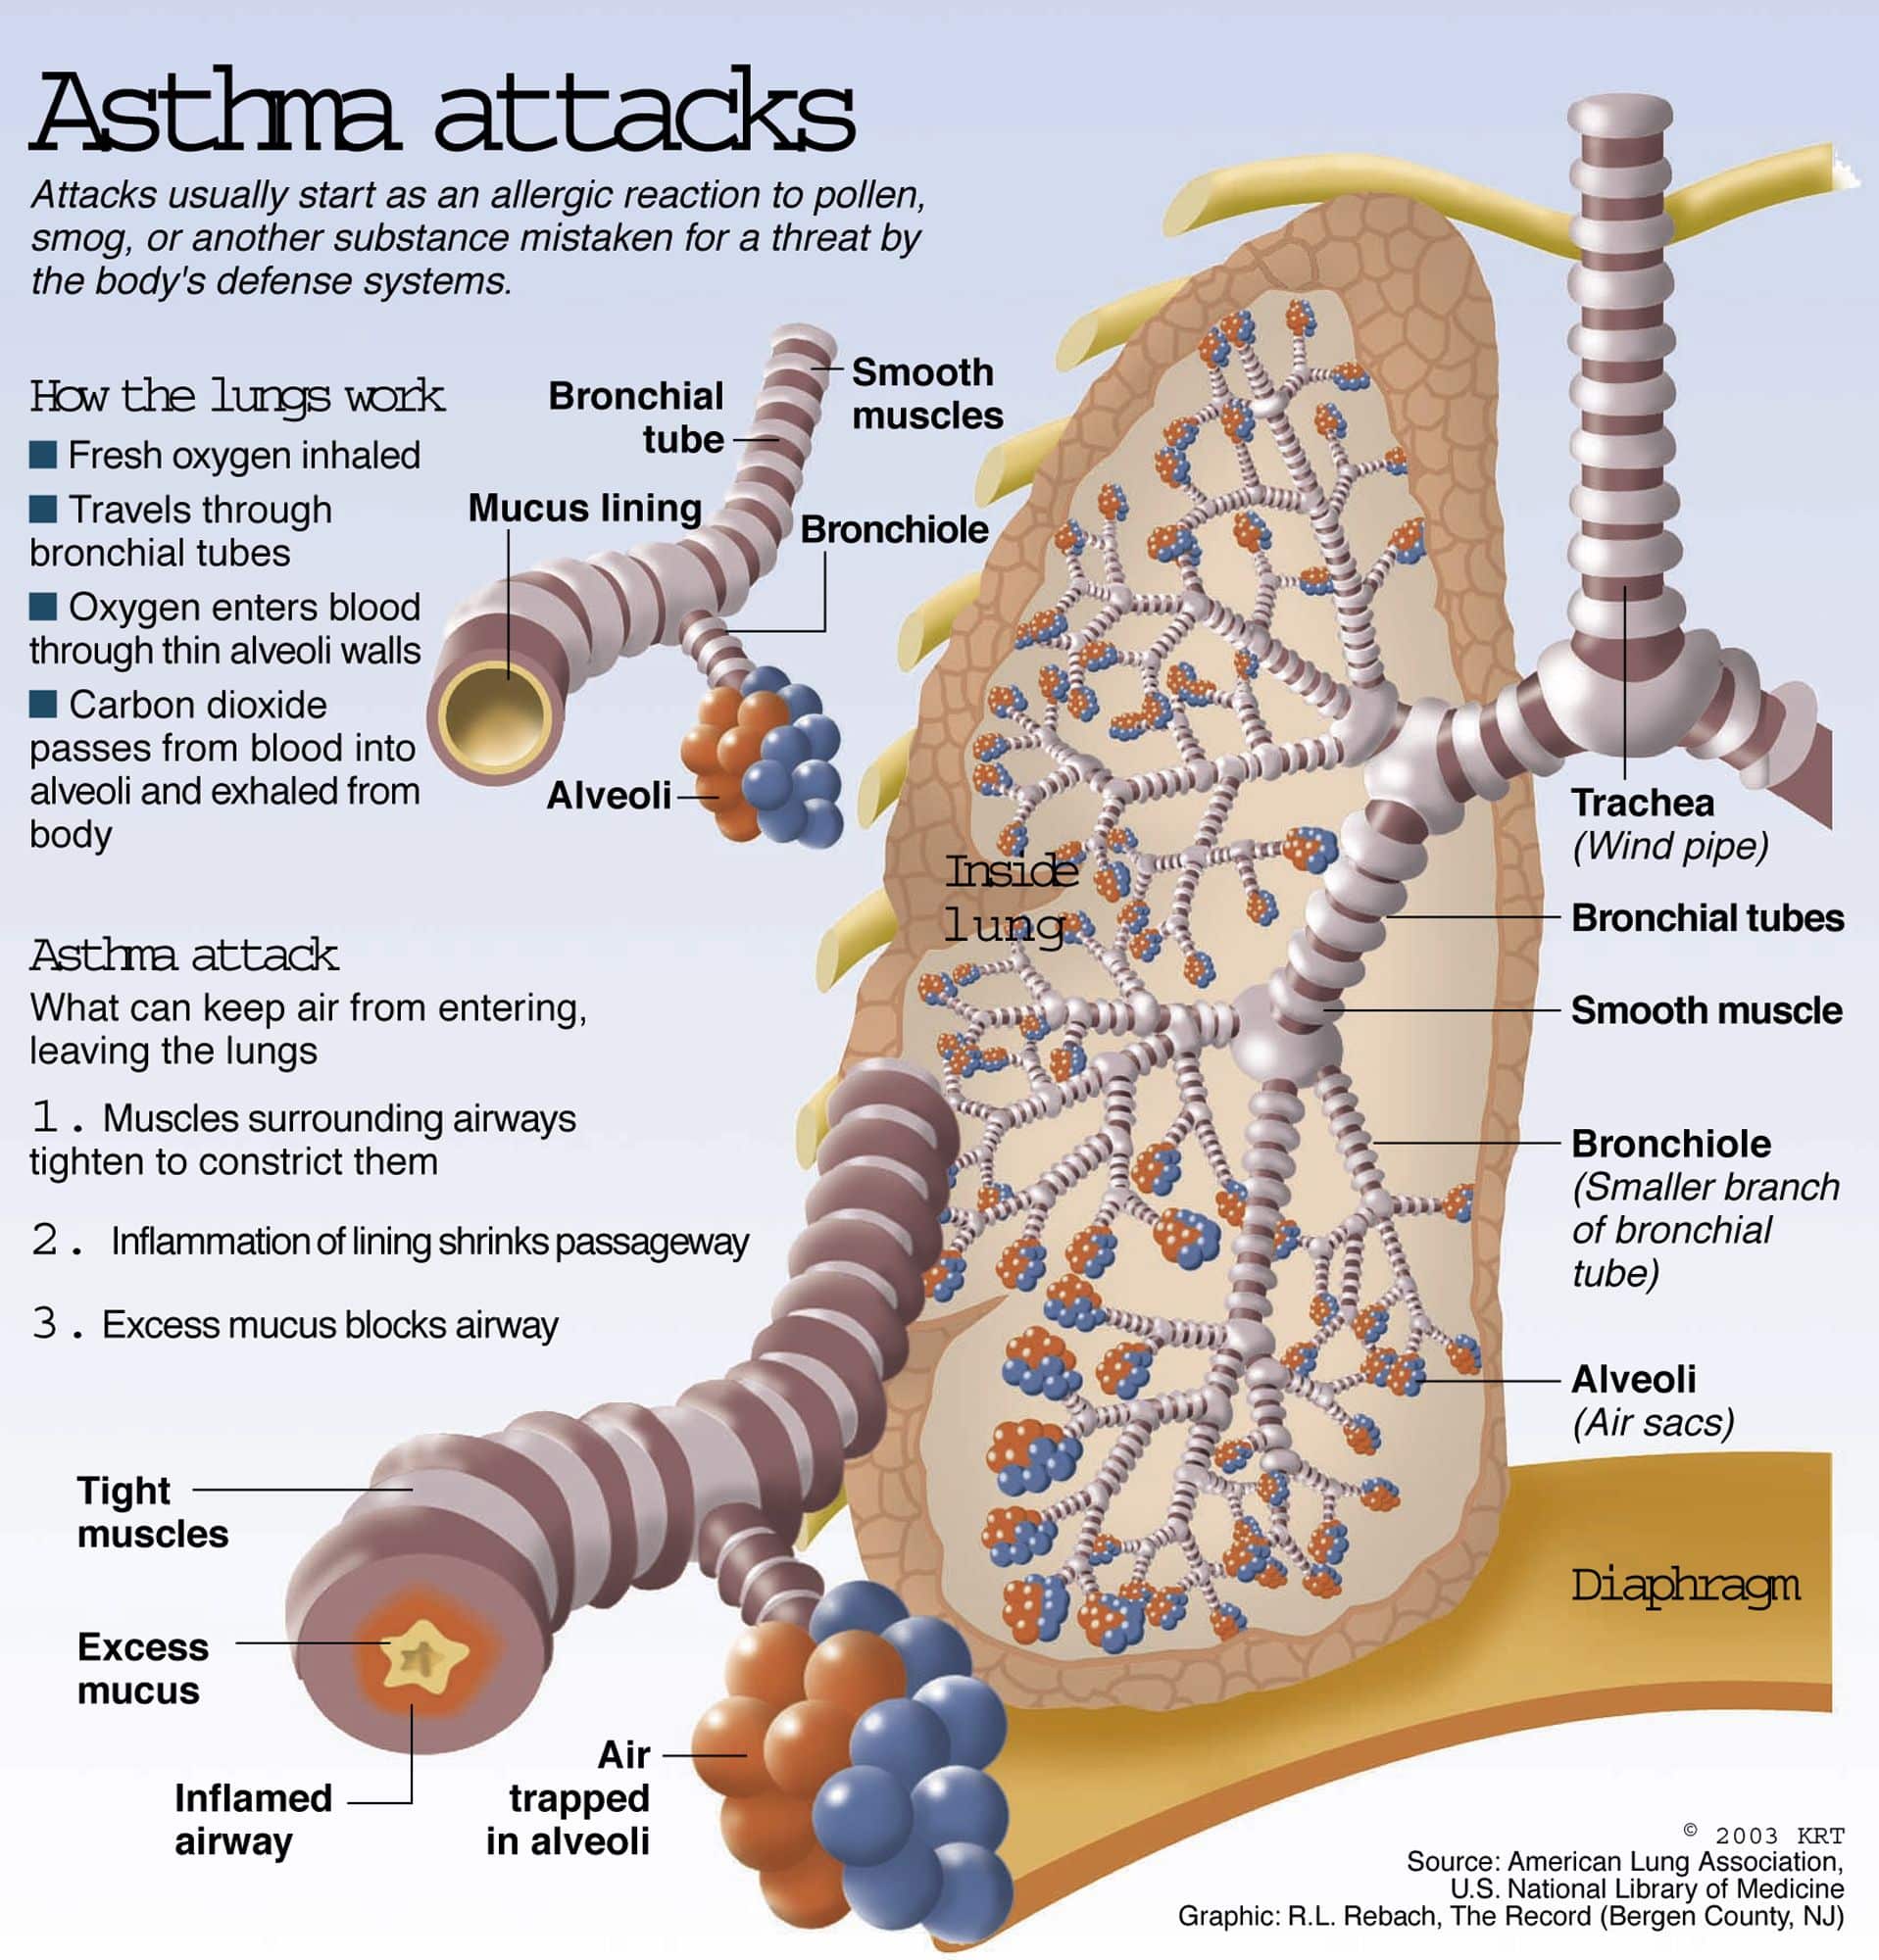 Seeking Advice On Dealing With Asthma? Look Below For Some Great Tips ...